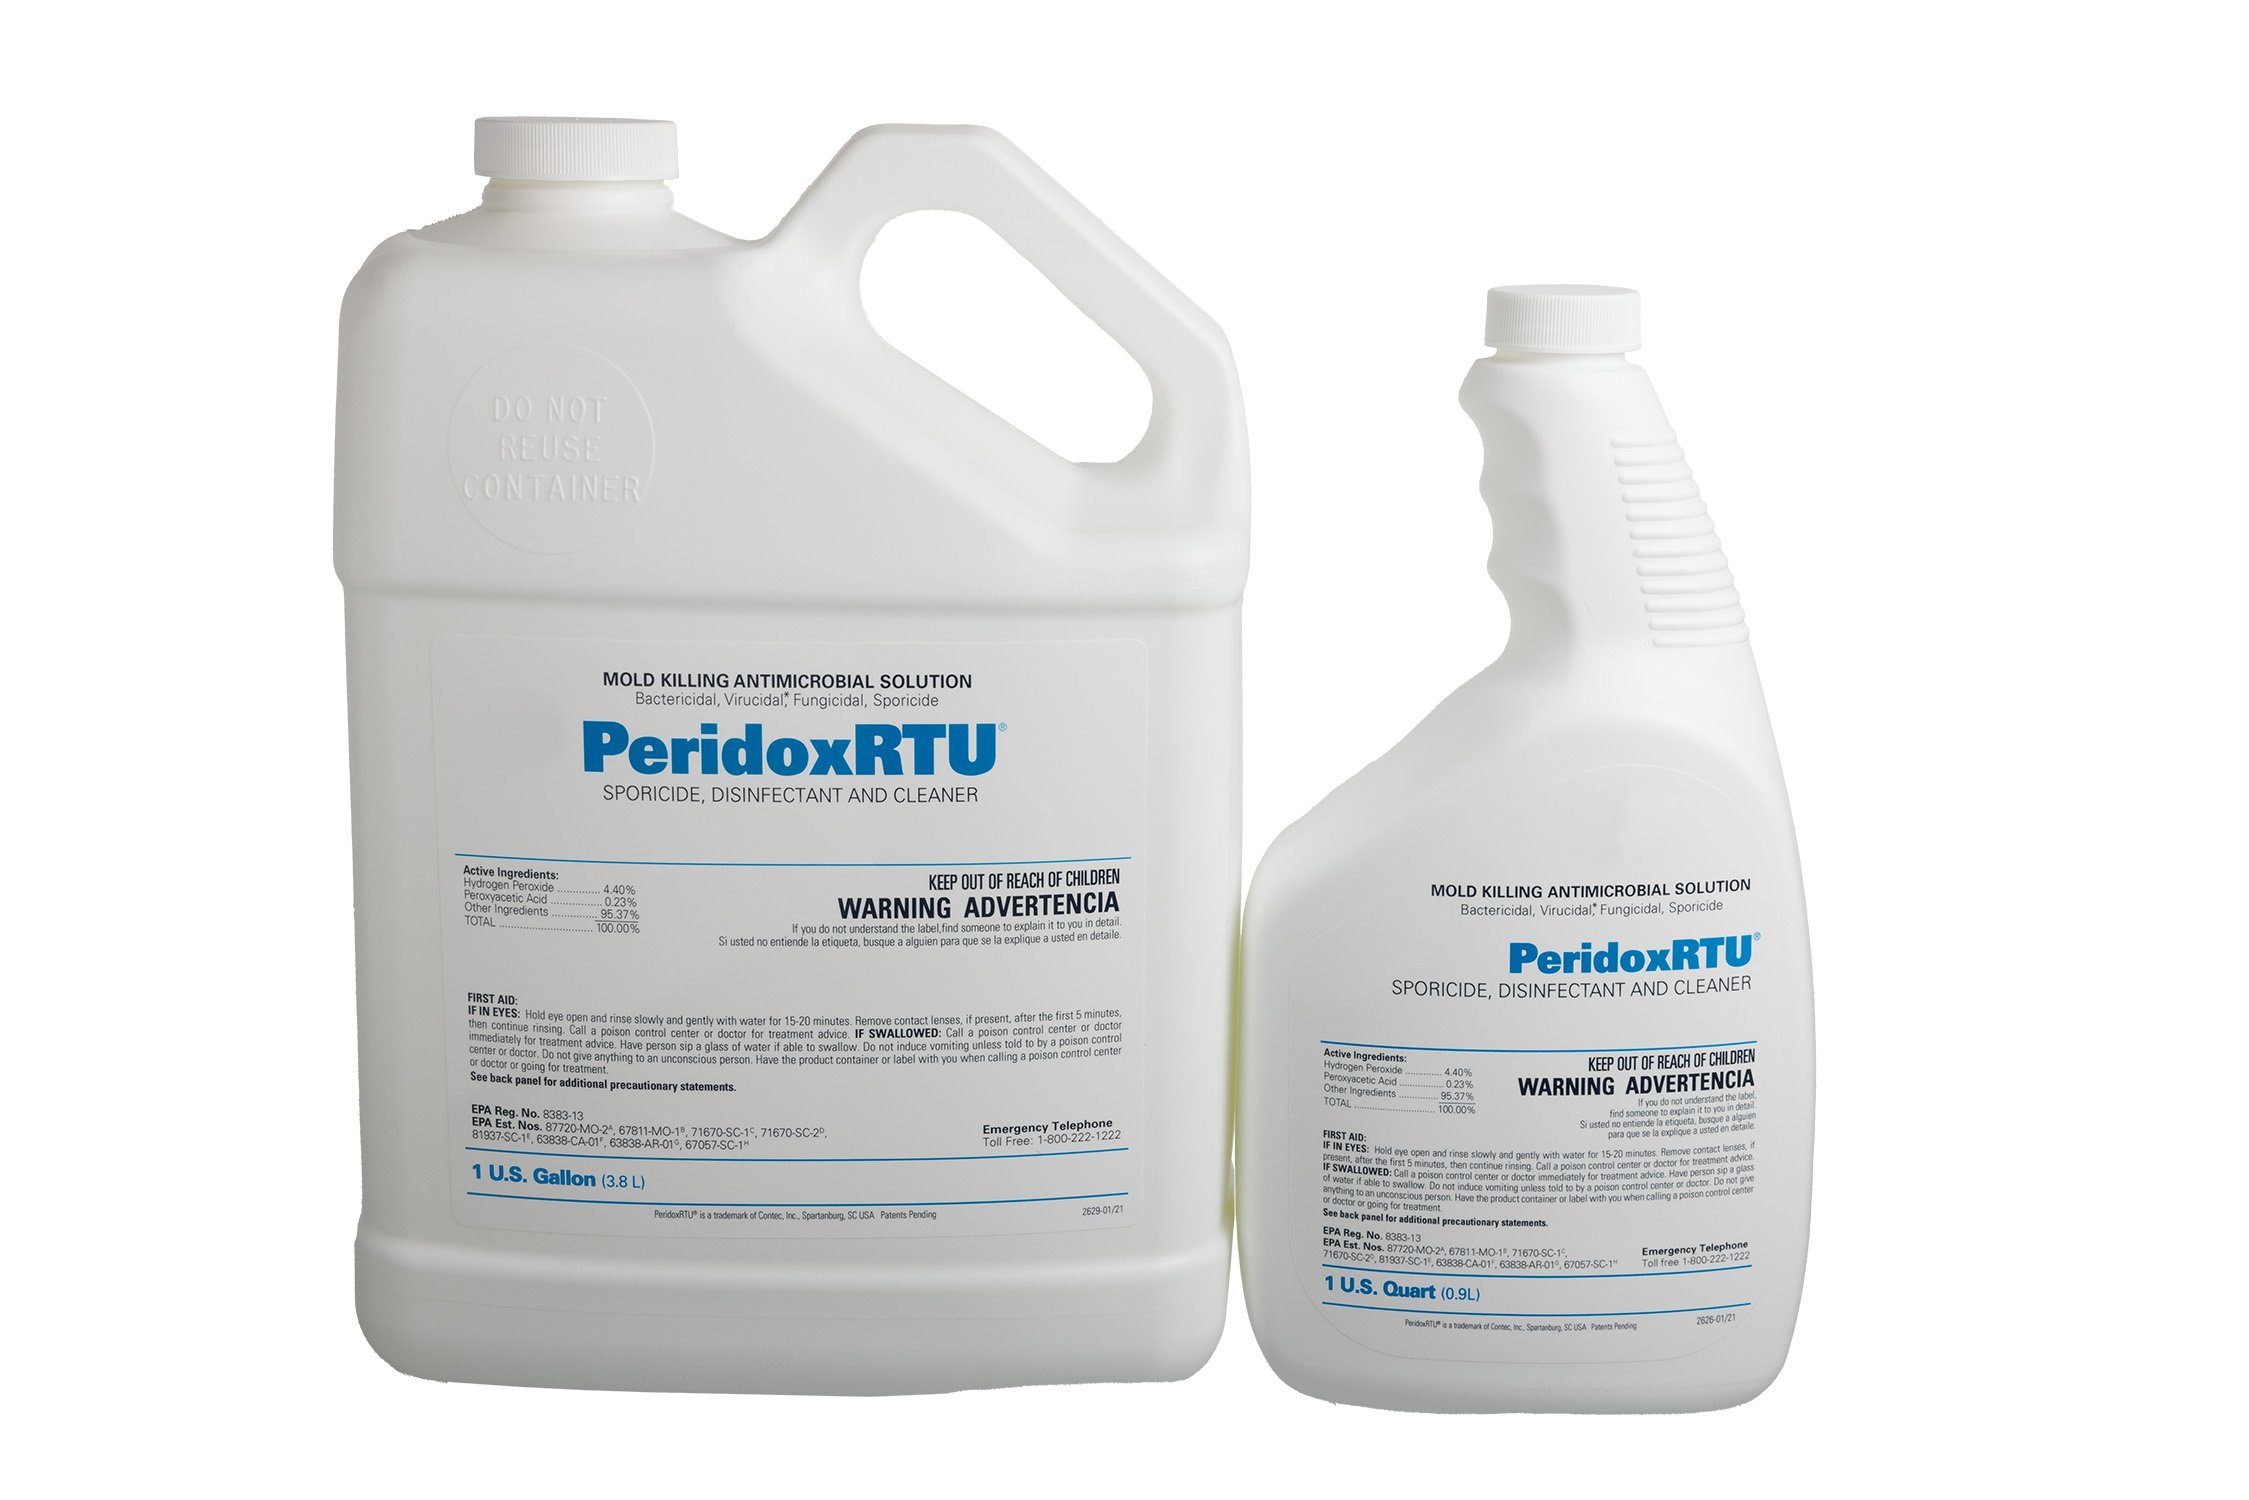 PeridoxRTU Sporicidal Disinfectant and Cleaner-2